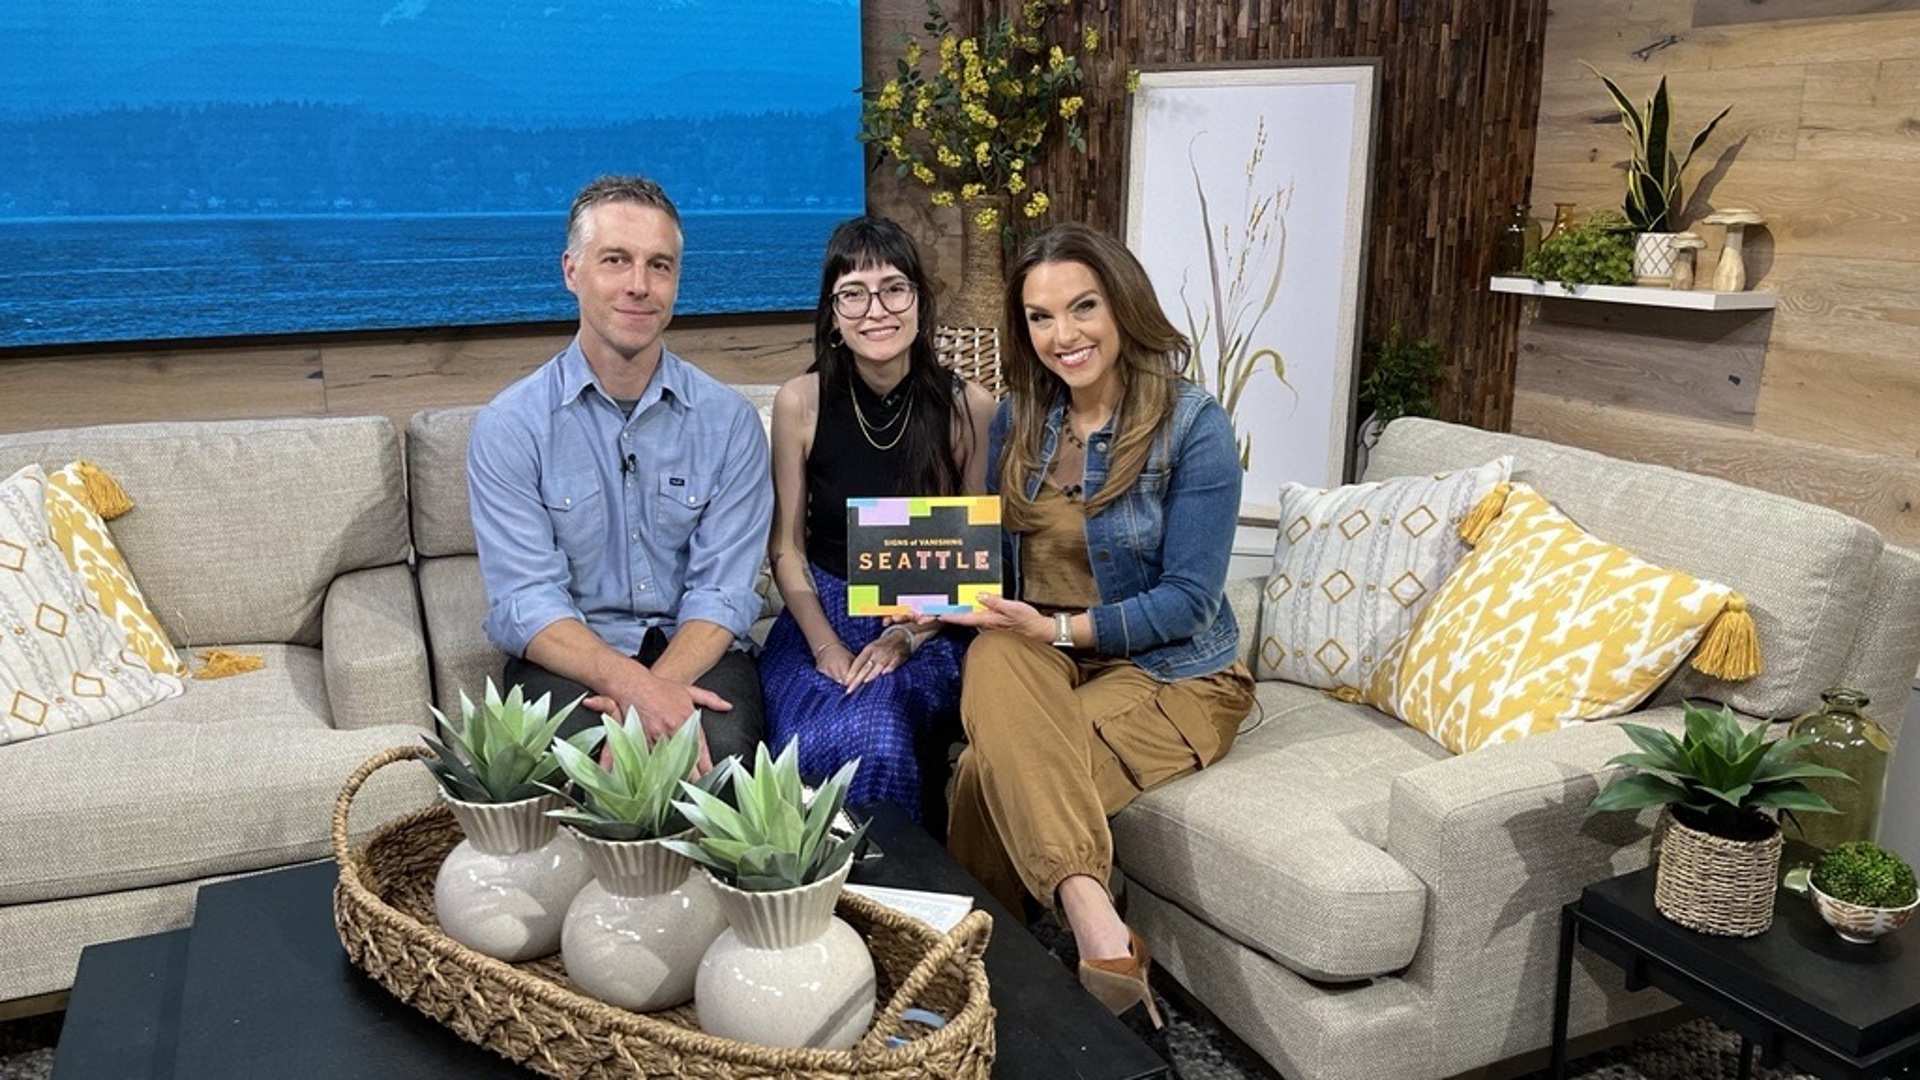 Cynthia Brothers from the iconic Instagram account and her book partner Thomas Eykemans talk with Amity about writing "Signs of Vanishing Seattle." #newdaynw